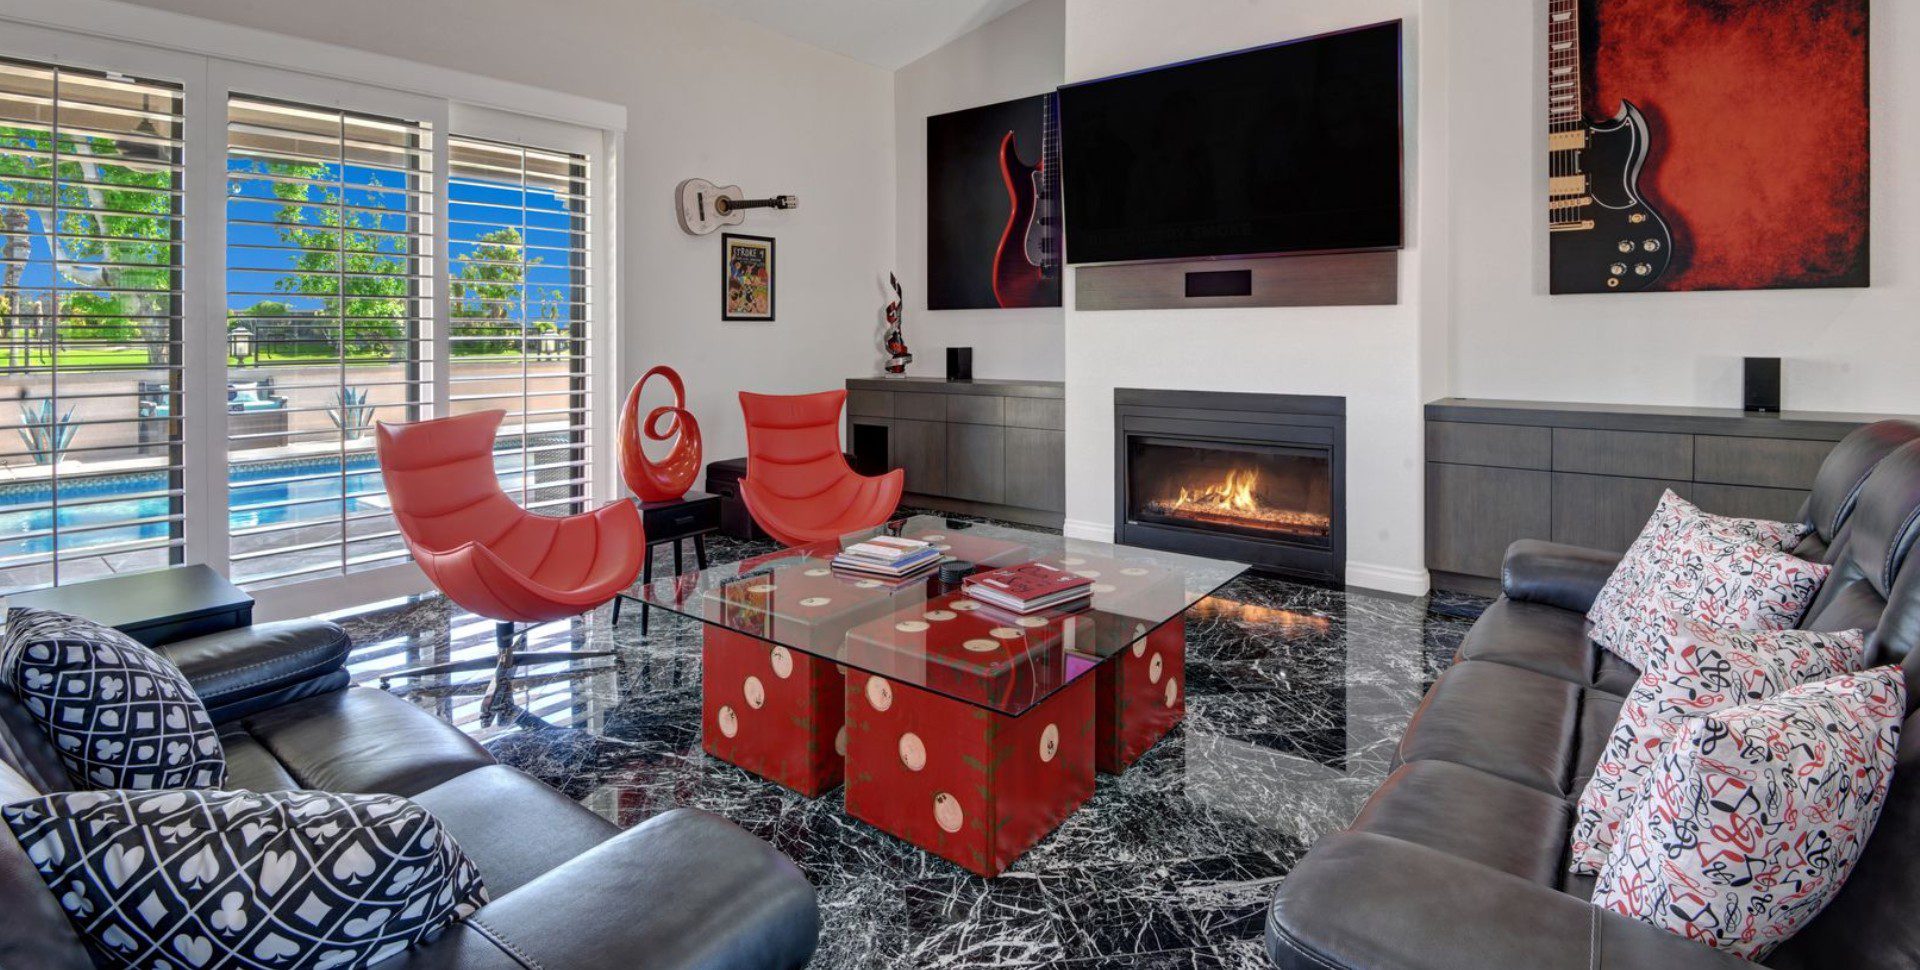 A living room with red chairs and a fire place